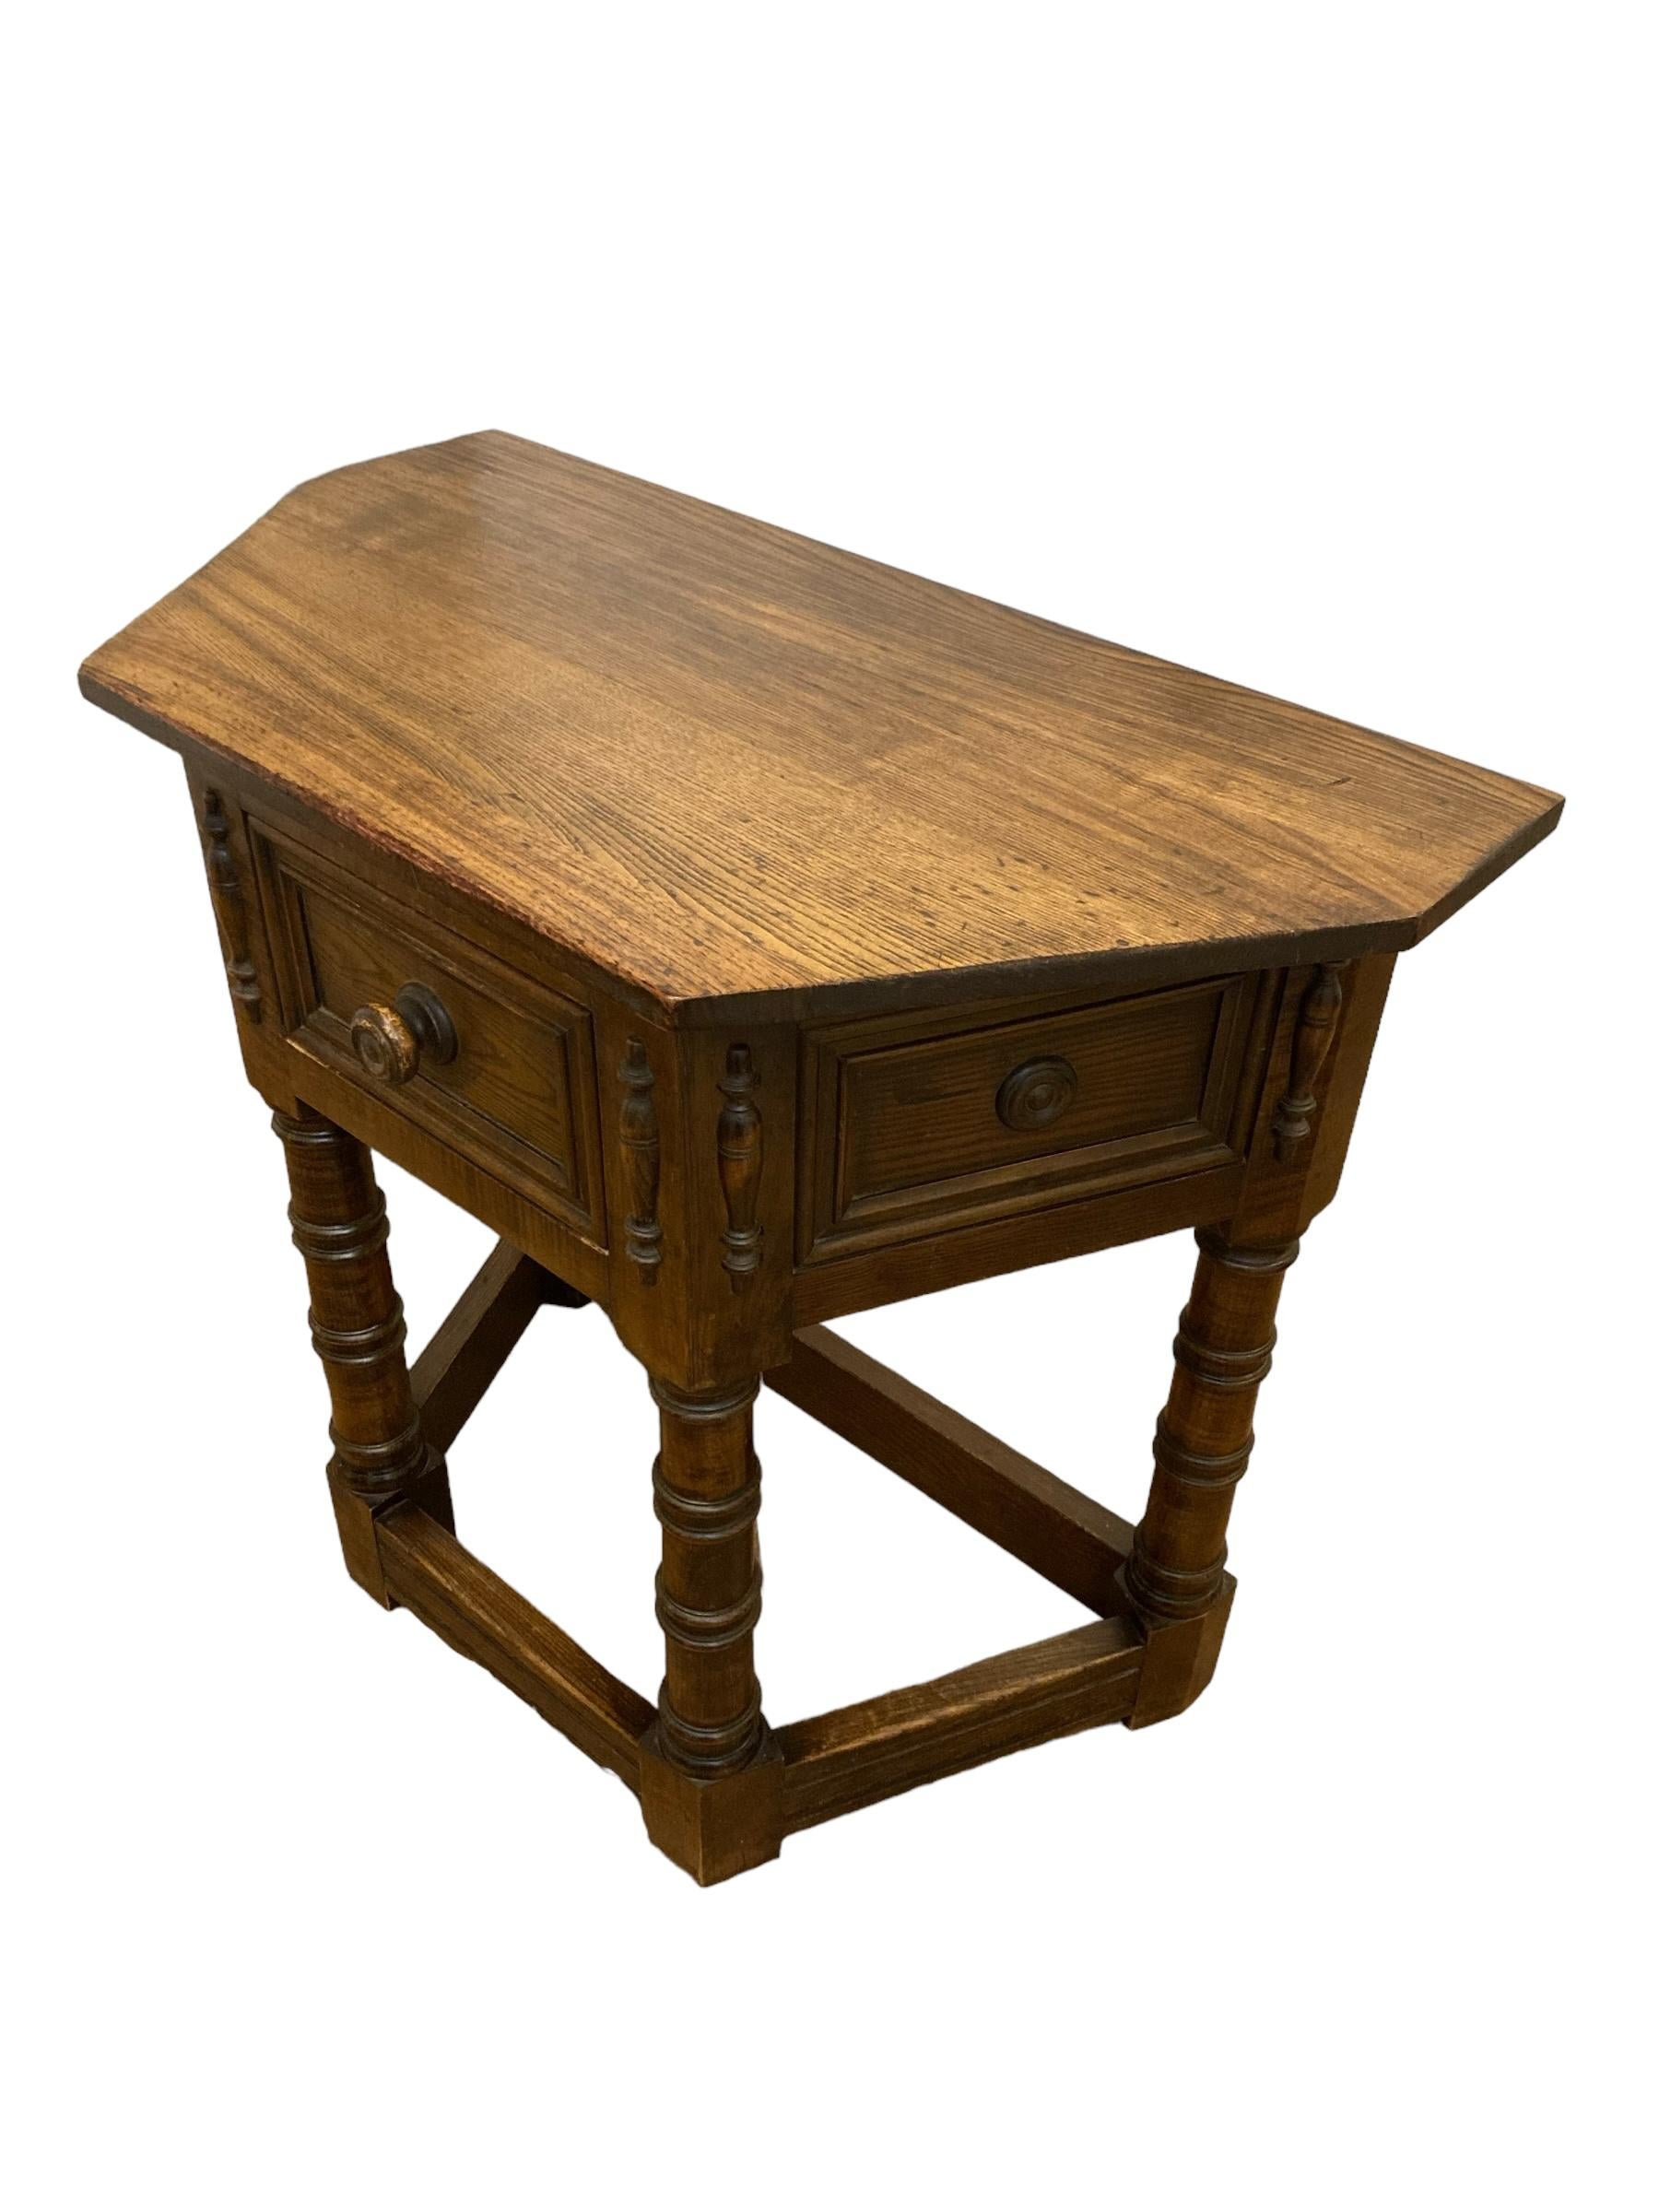 17th Century Style Gothic Look Oak Credence Side Hall Table. This timeless piece exudes elegance and charm. Crafted from high-quality oak, this table showcases a rich, warm finish that highlights the natural beauty of the wood. With its classic